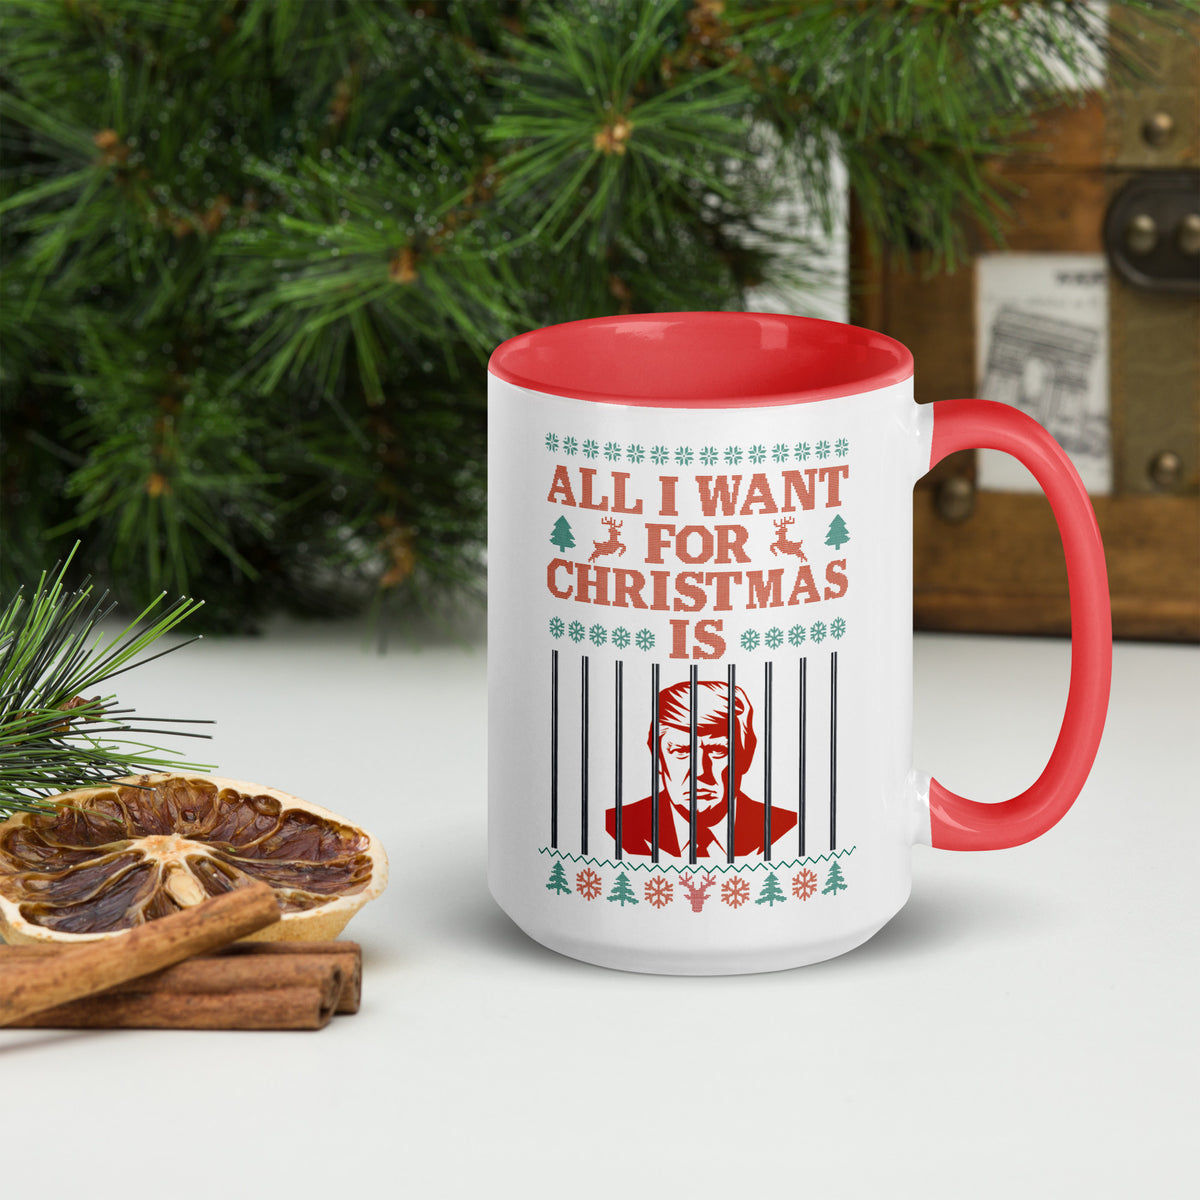 All I Want For Christmas is Trump in Jail Mug